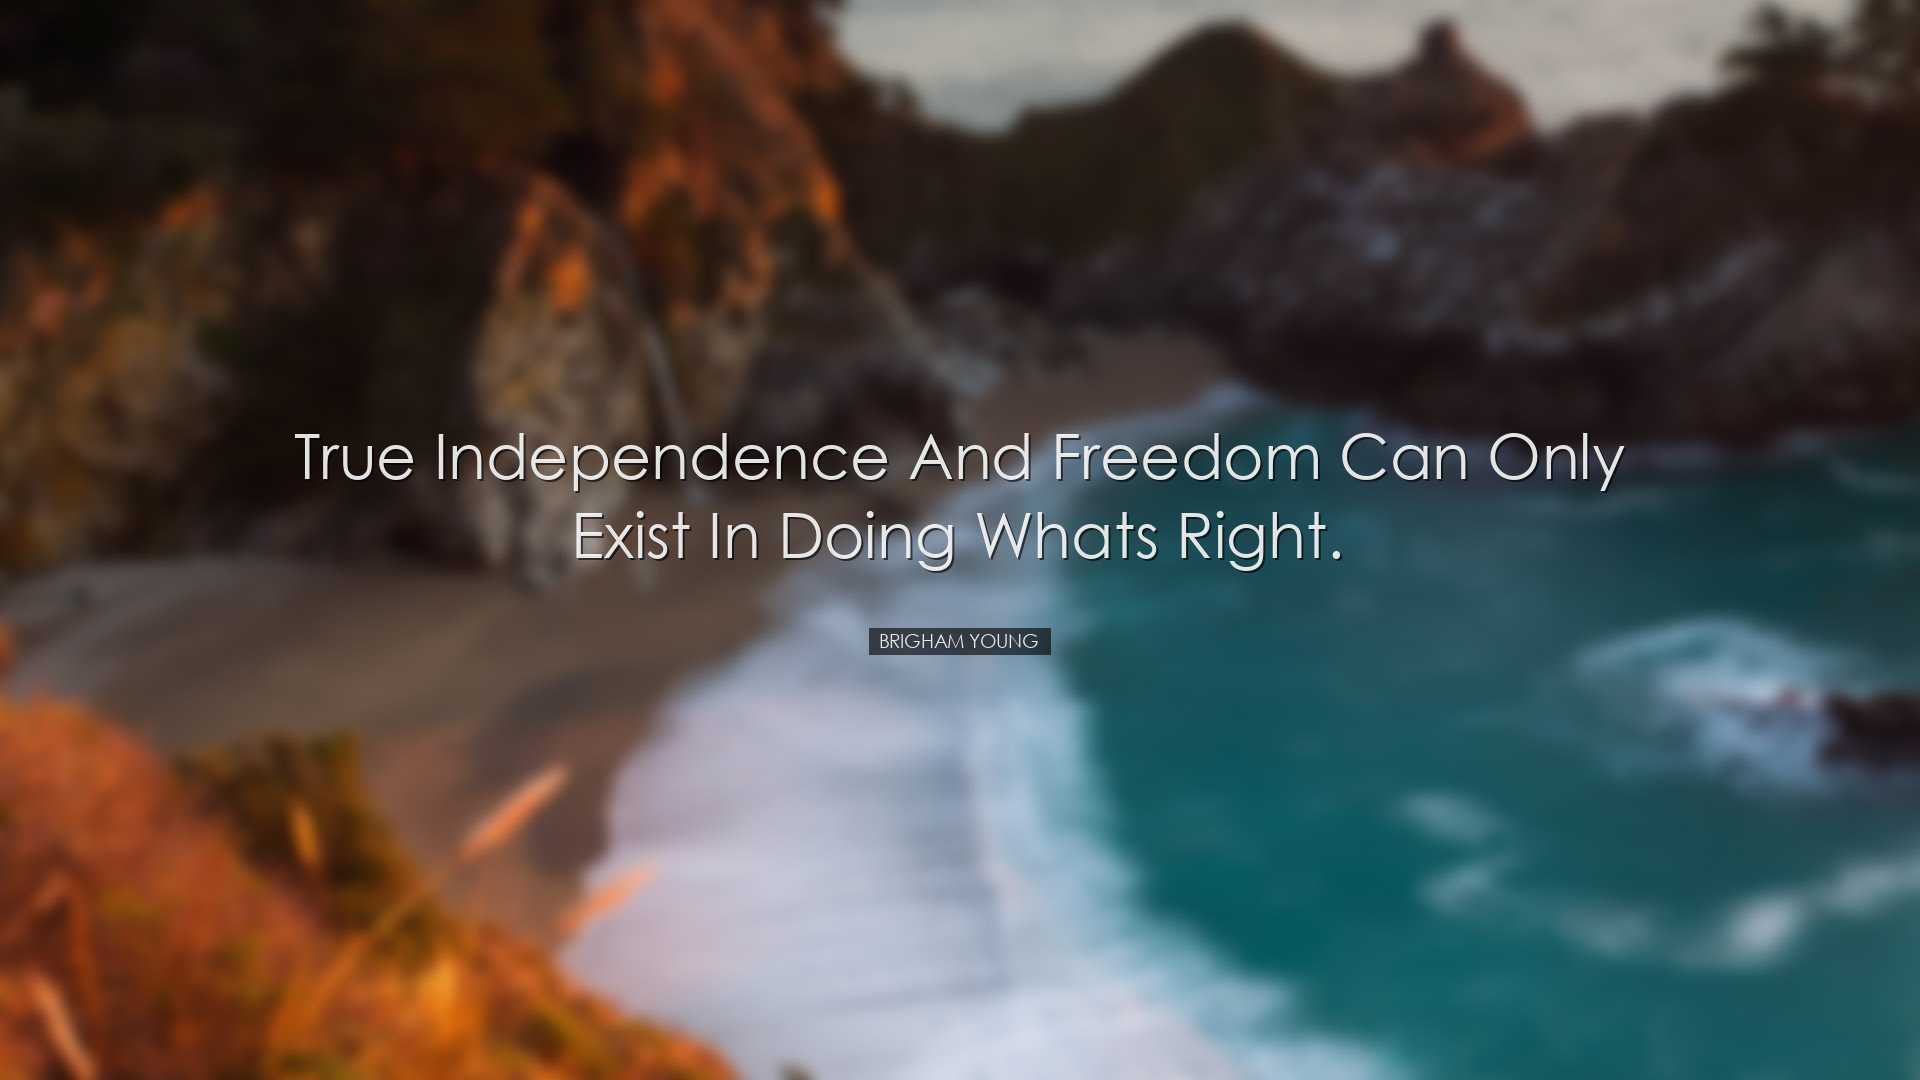 True independence and freedom can only exist in doing whats right.